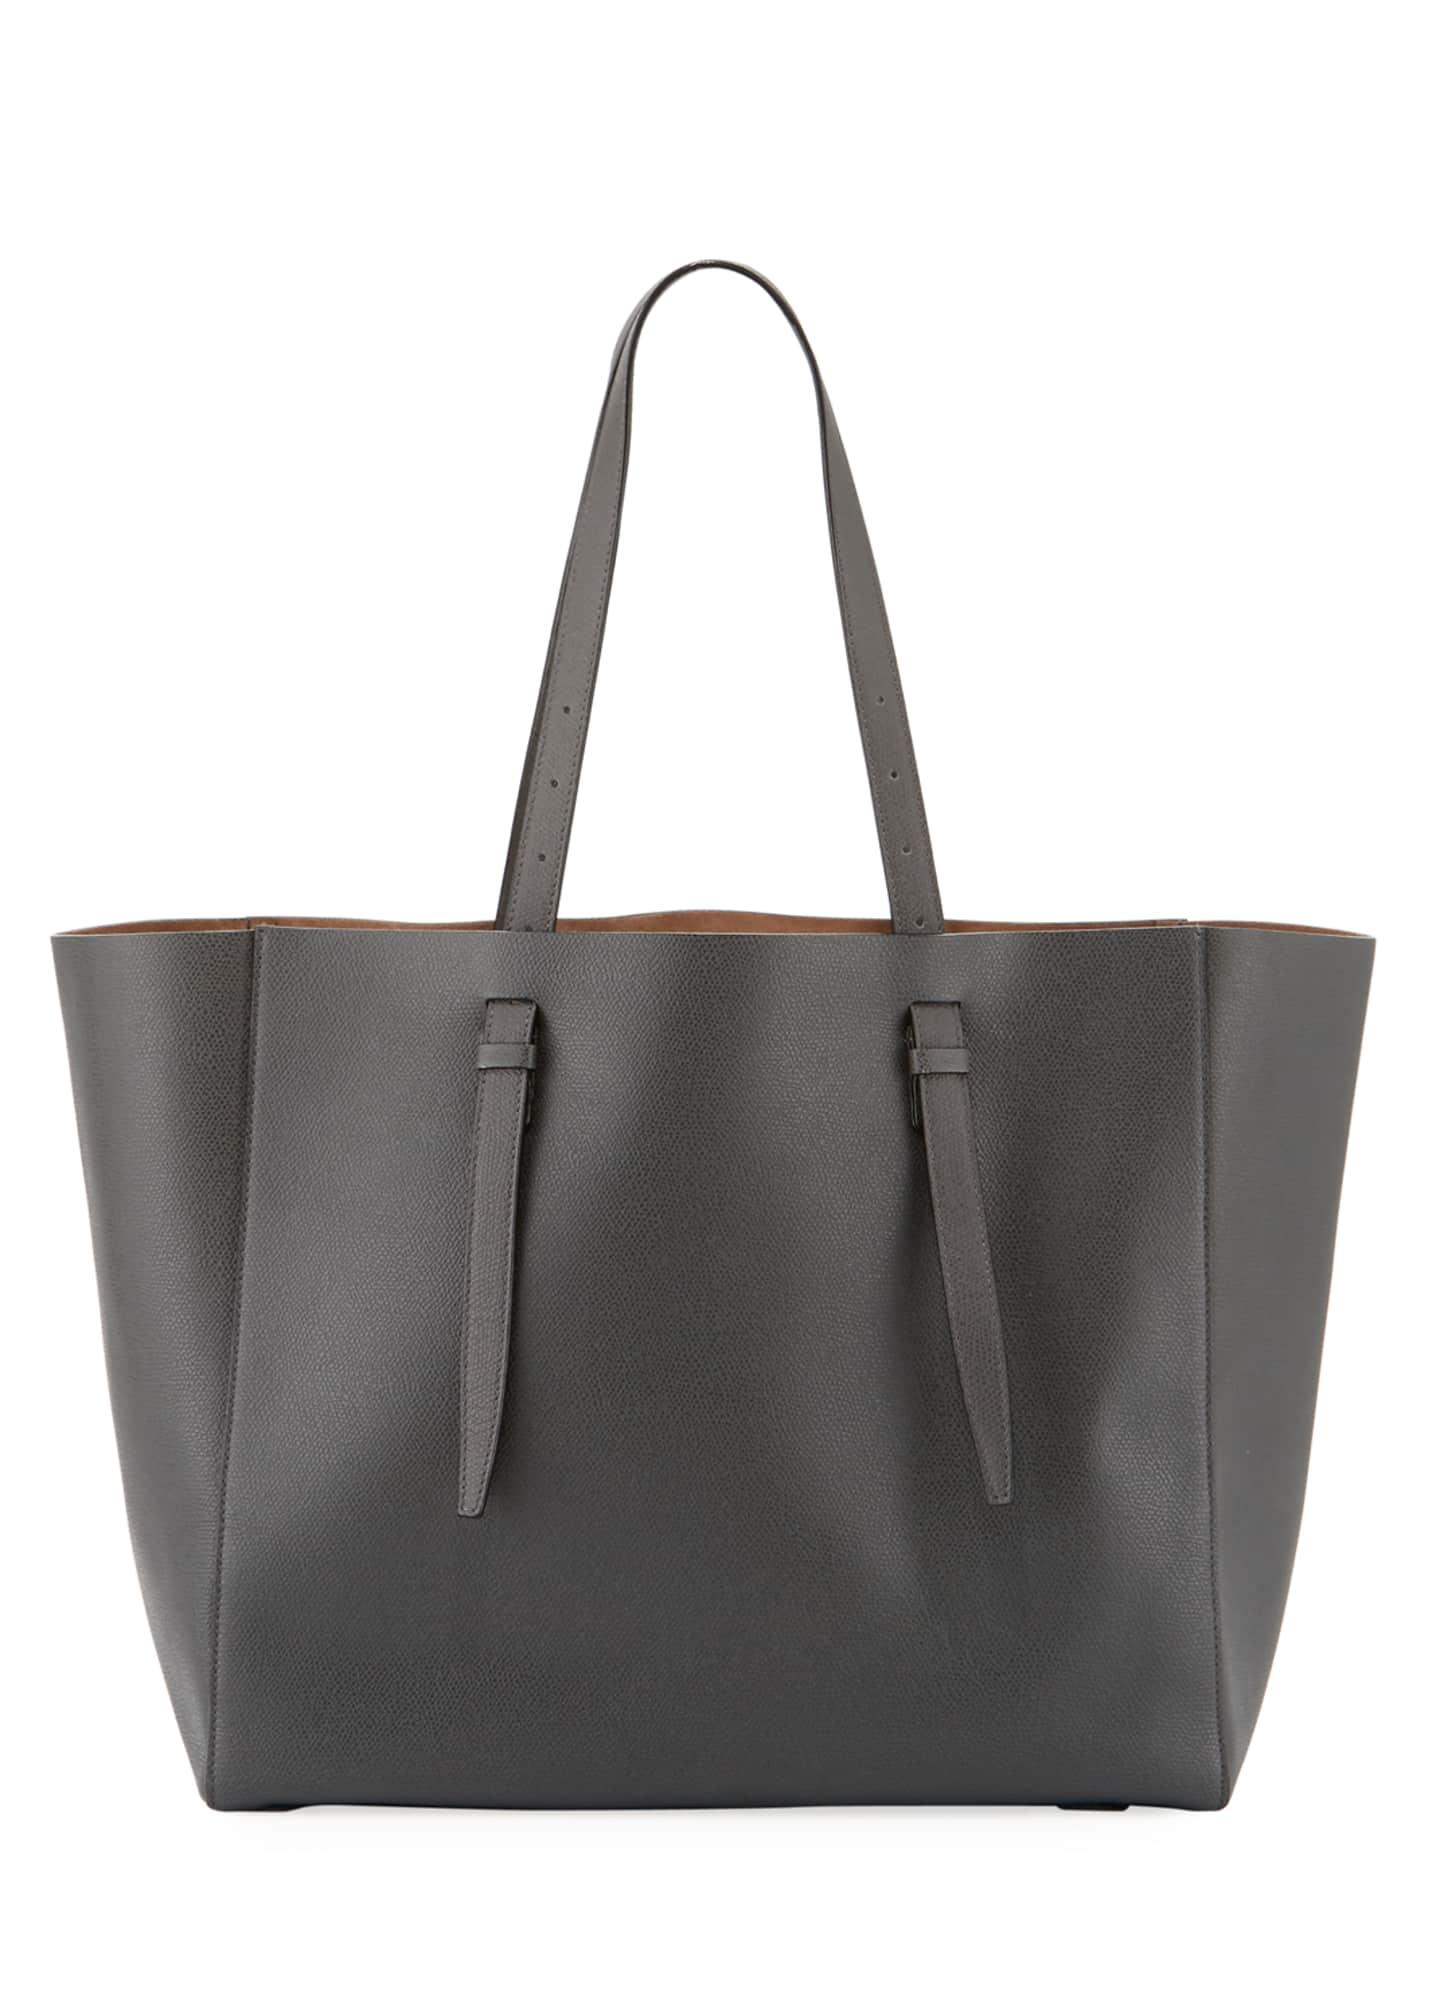 Valextra Soft Leather Tote Bag in Dark Gray (Gray) - Lyst